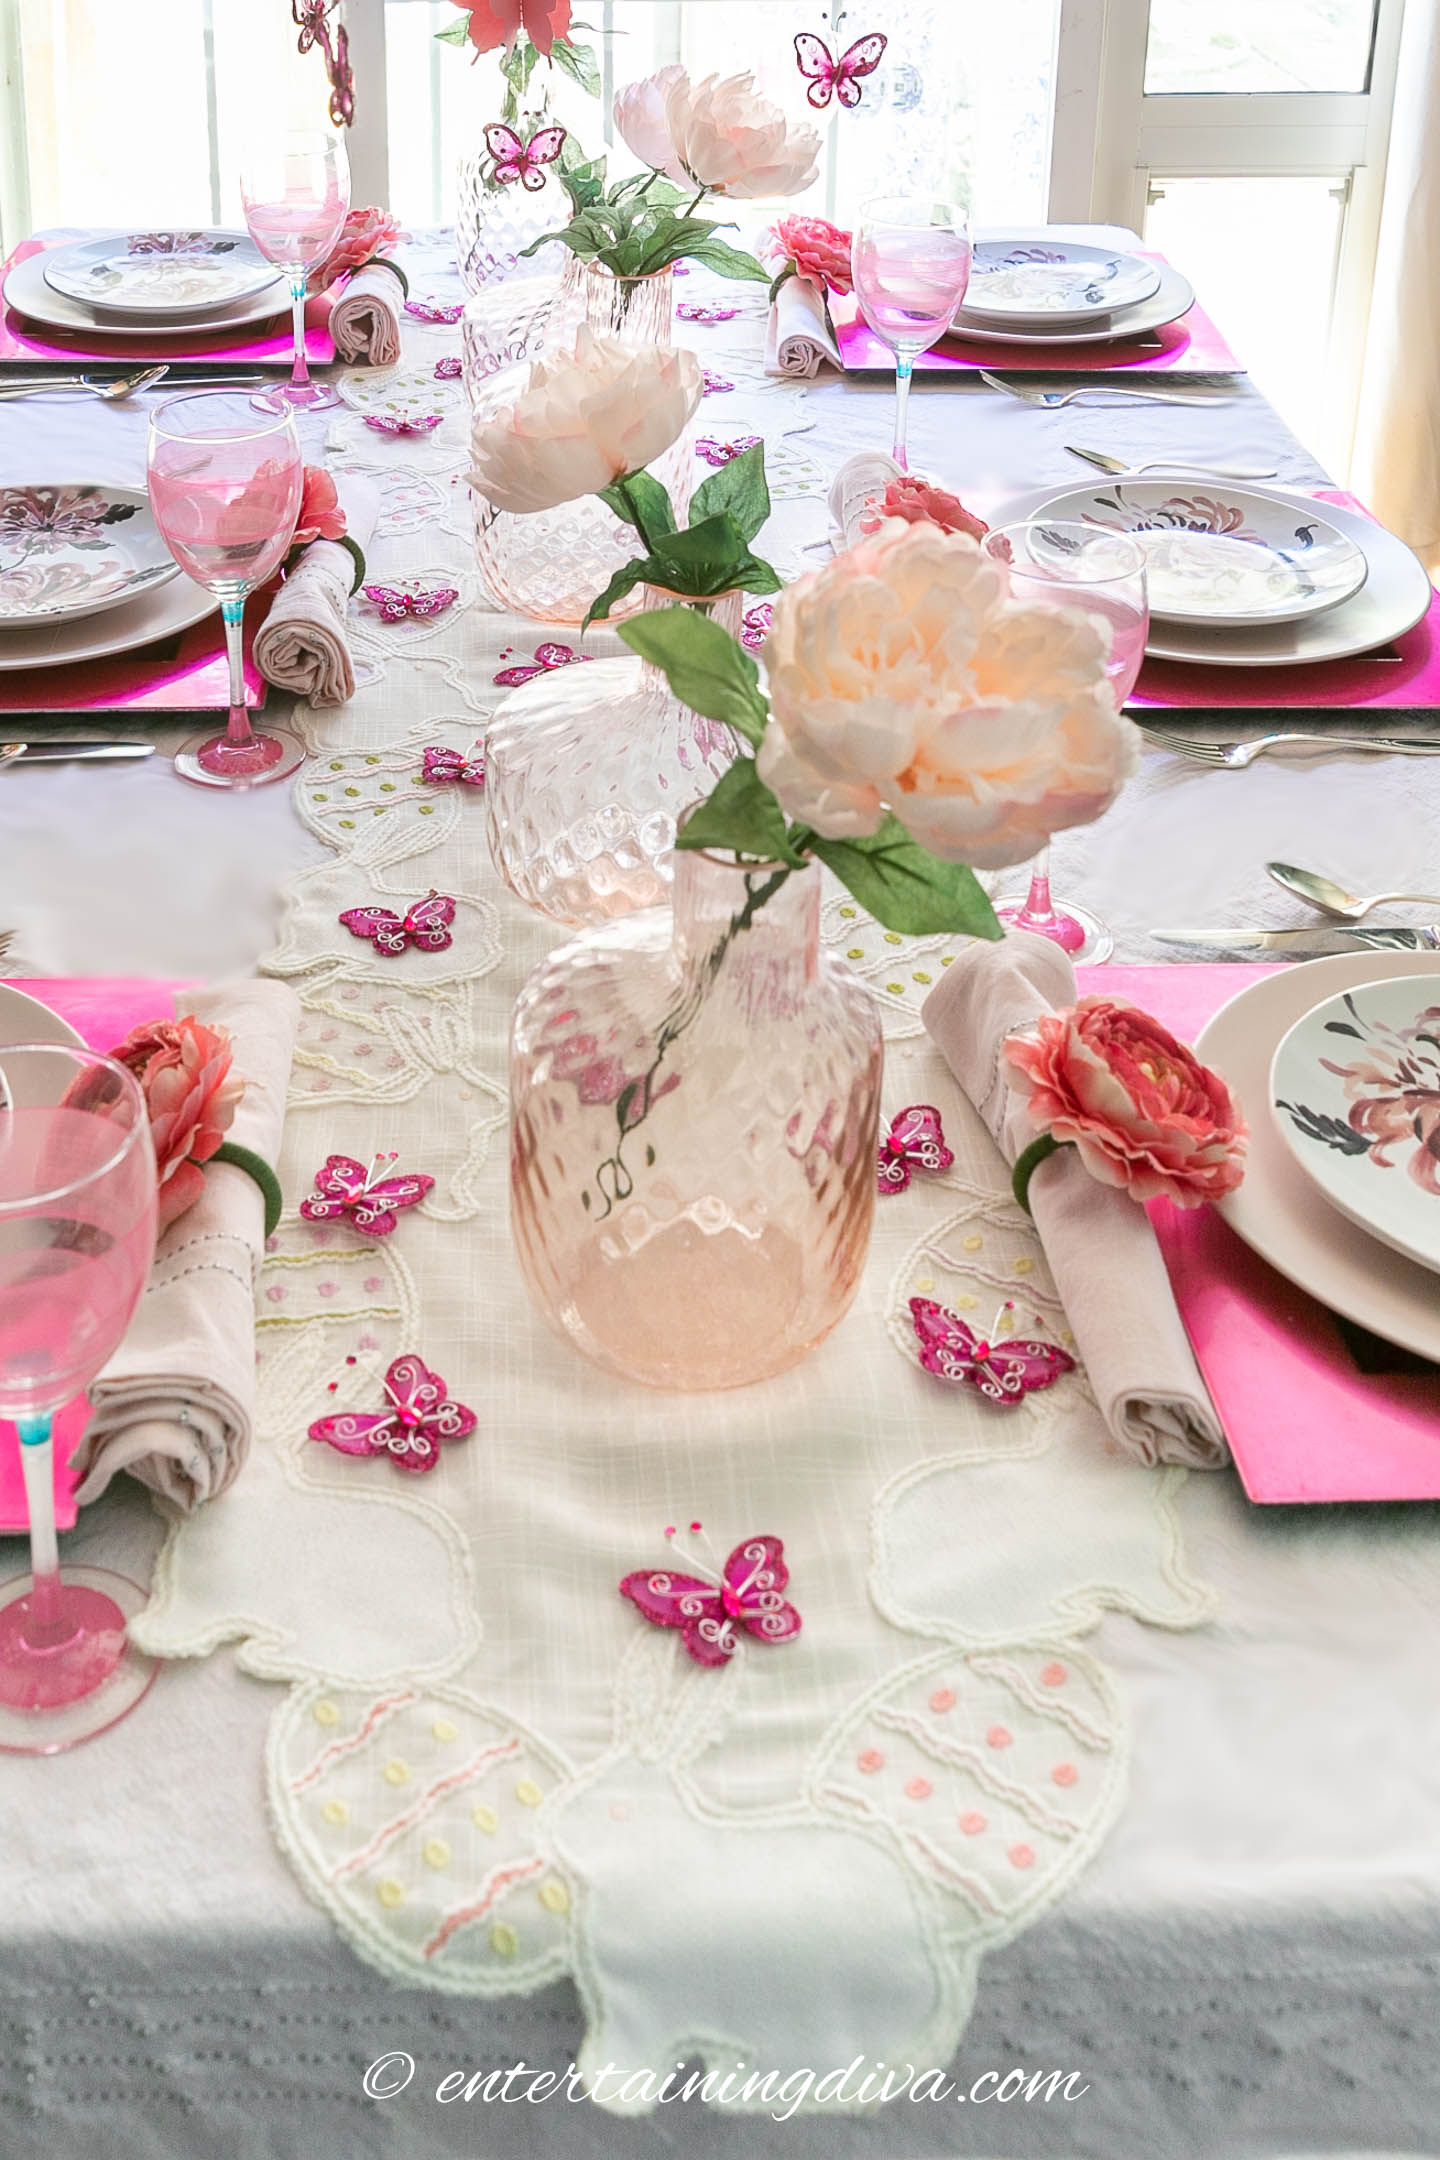 Pink flowers, vases and butterflies use as a centerpiece